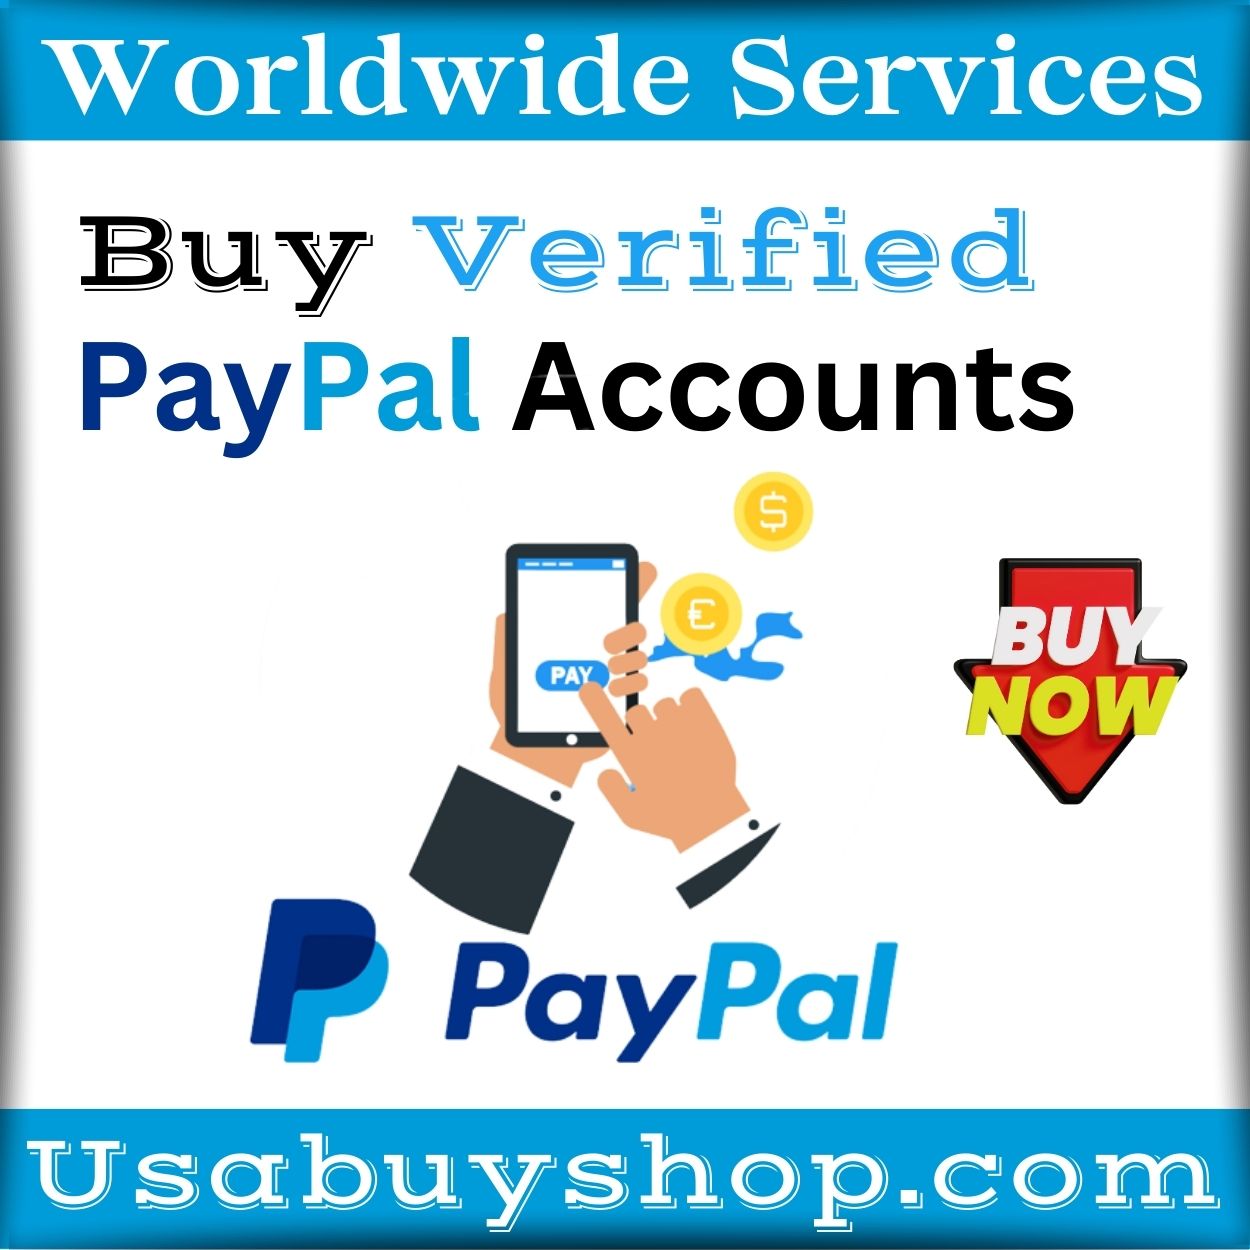 Buy Verified PayPal Accounts-100% USA,UK,CA Trusted Sellers